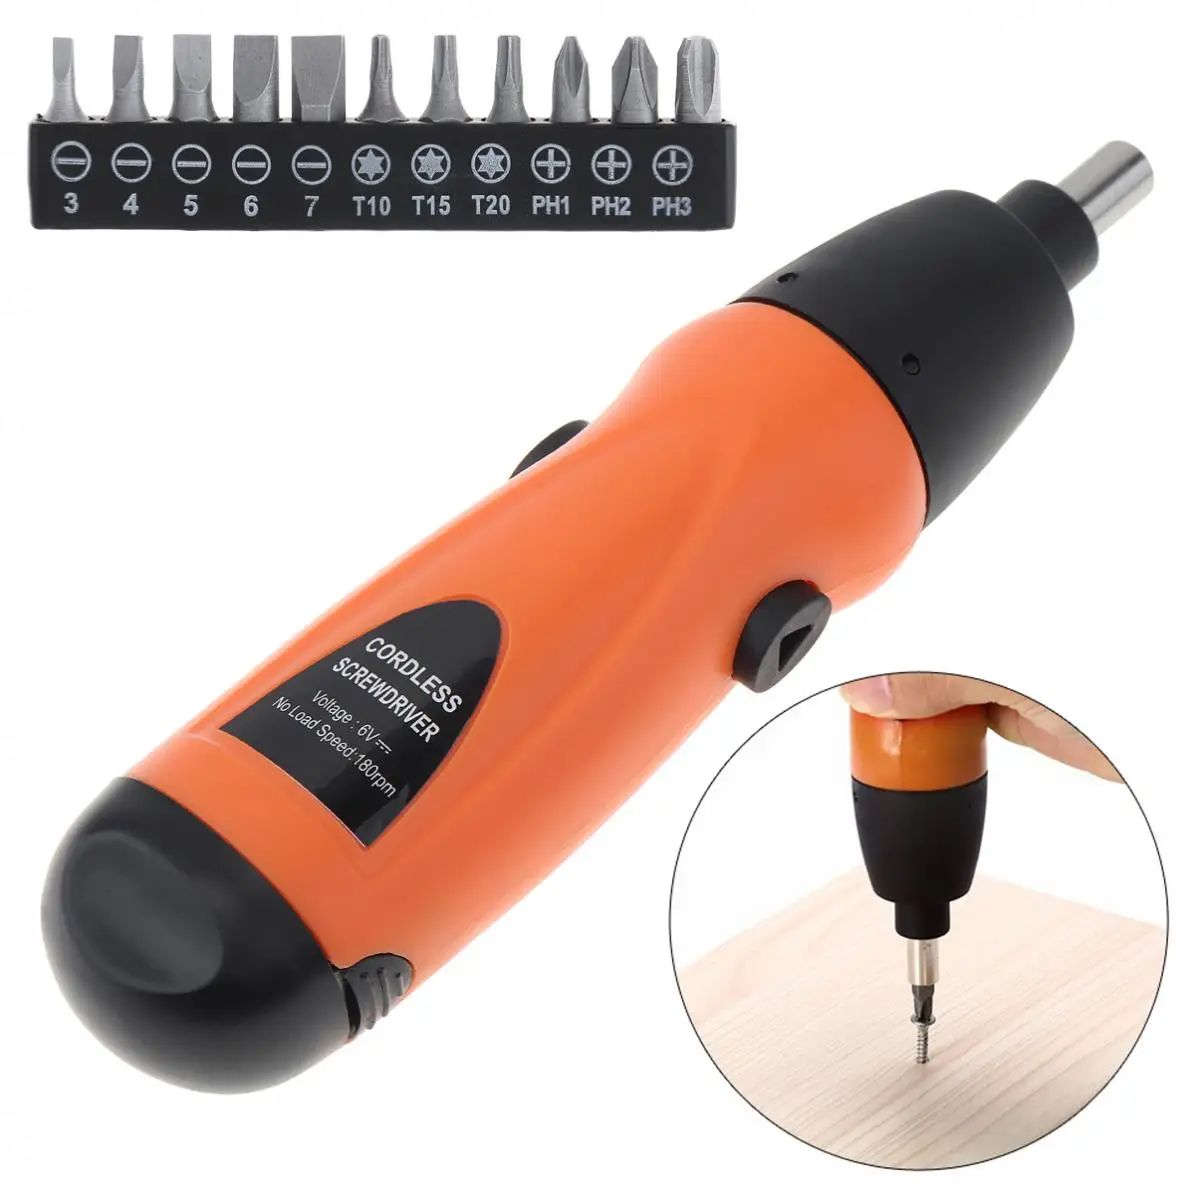 Kocome 6V Electric Screwdriver Battery Operated Cordless Screwdriver Drill Tool 